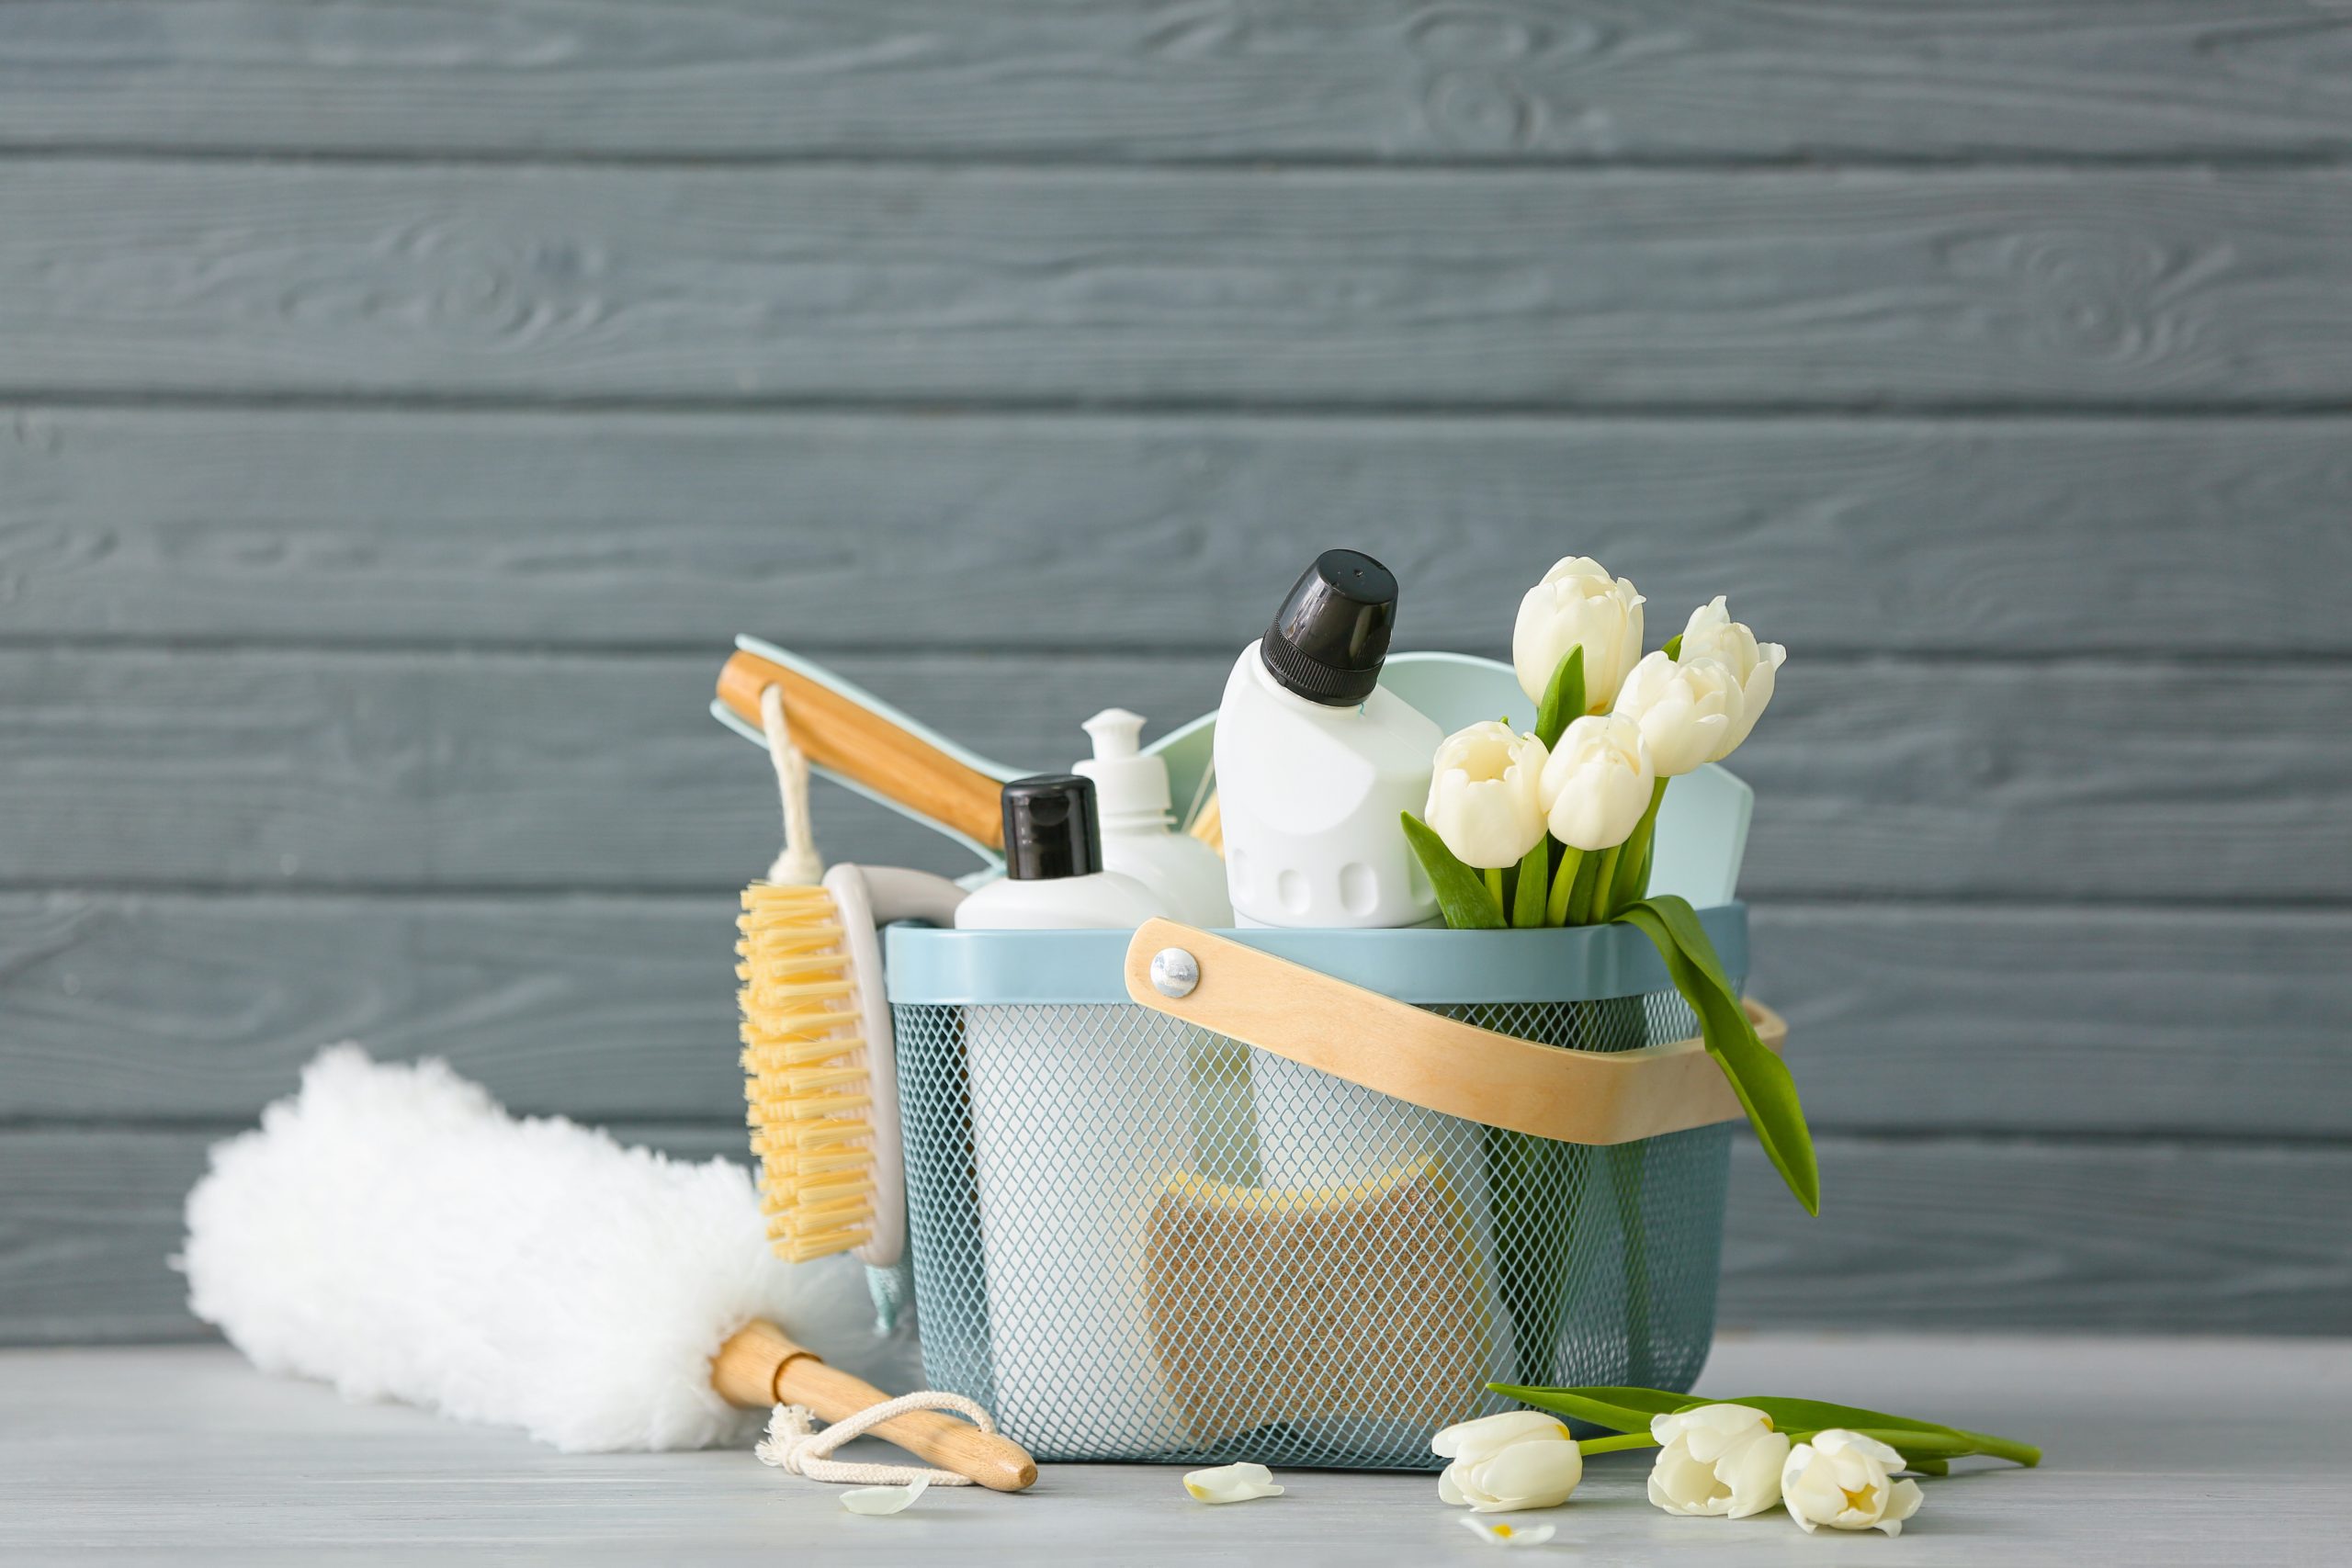 faq - adp - Is spring cleaning good for my health?